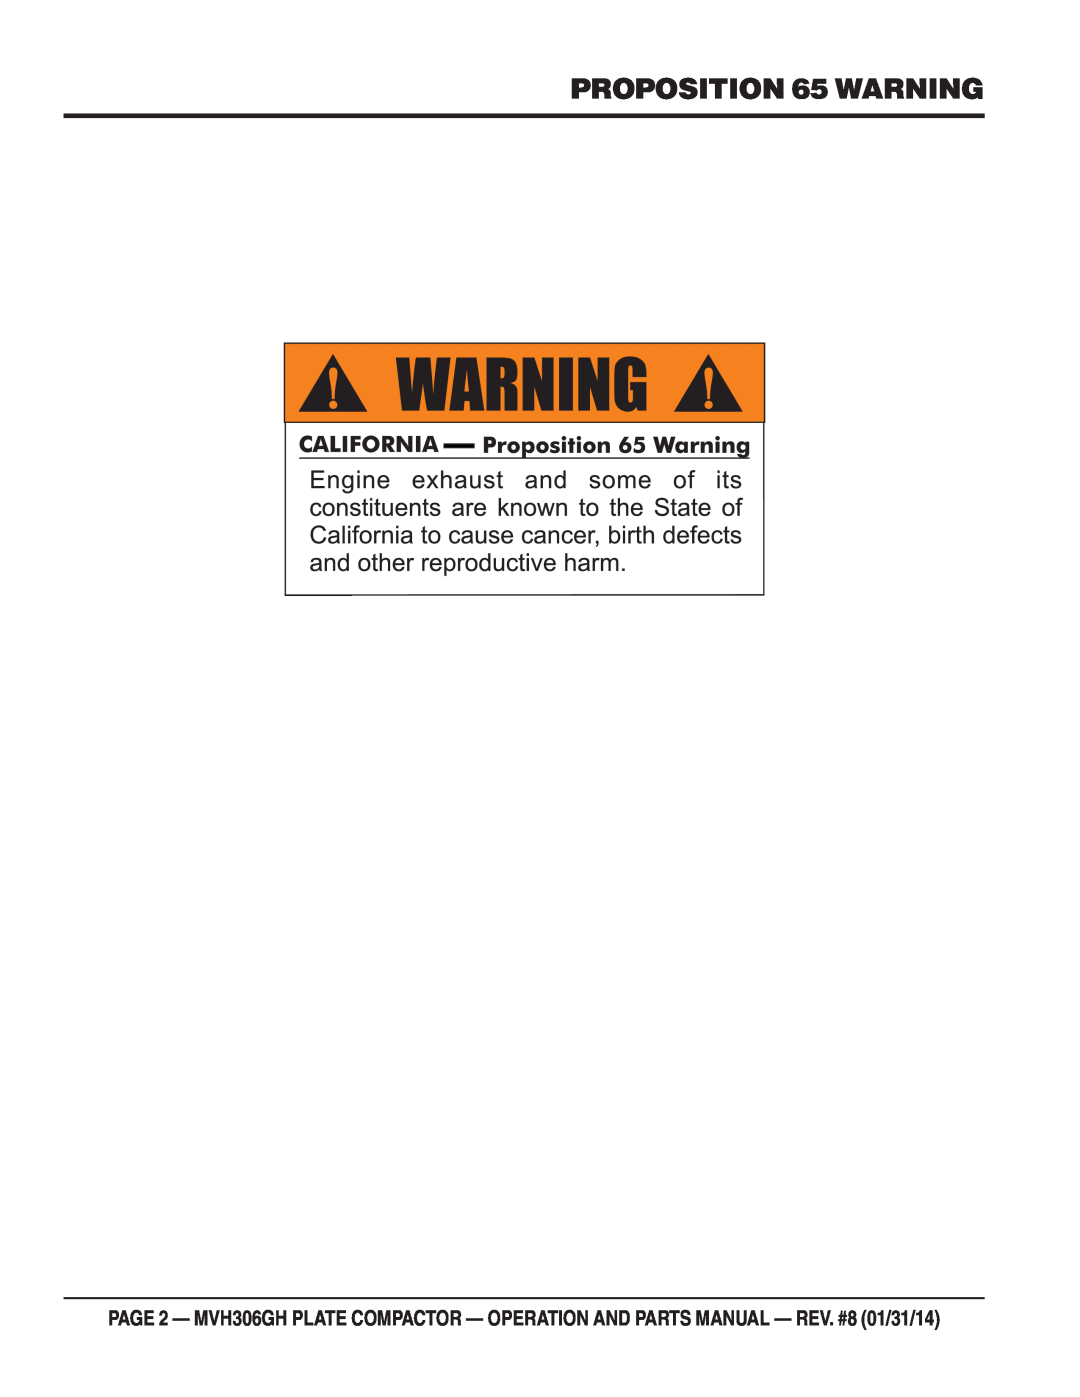 Multiquip MVH306GH manual PROPOSITION 65 WARNING 